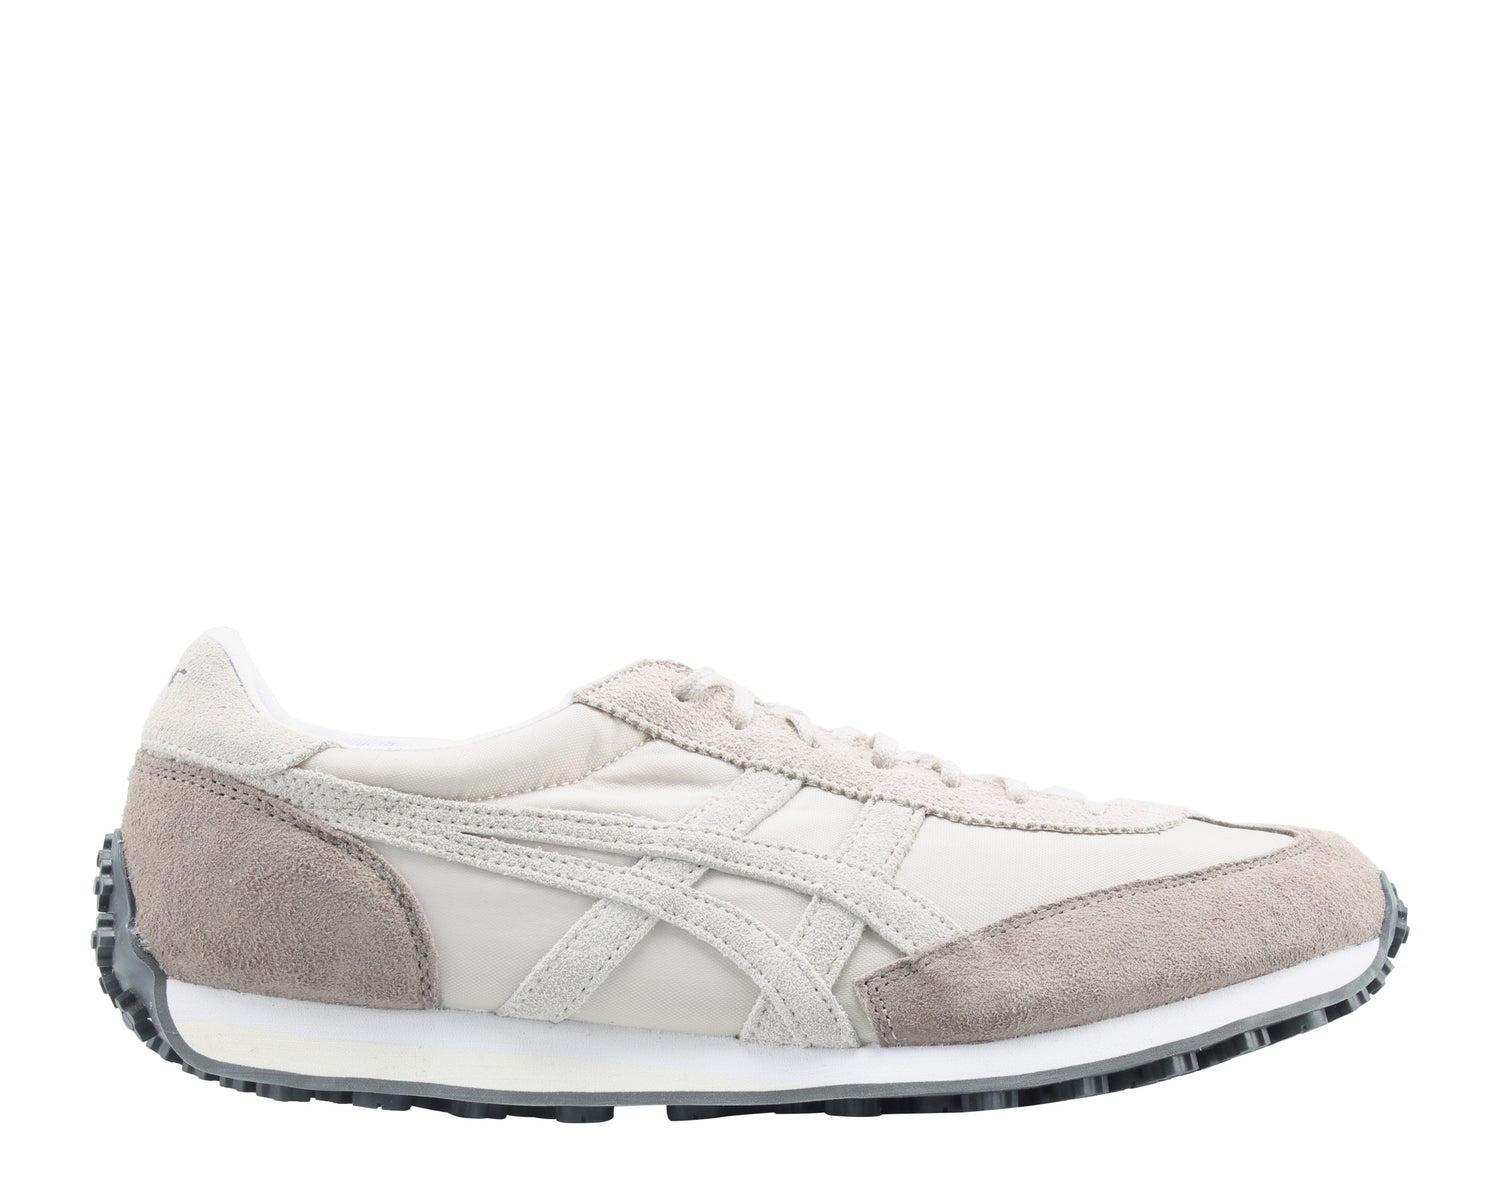 Onitsuka Tiger by Asics EDR 78 Running Shoes